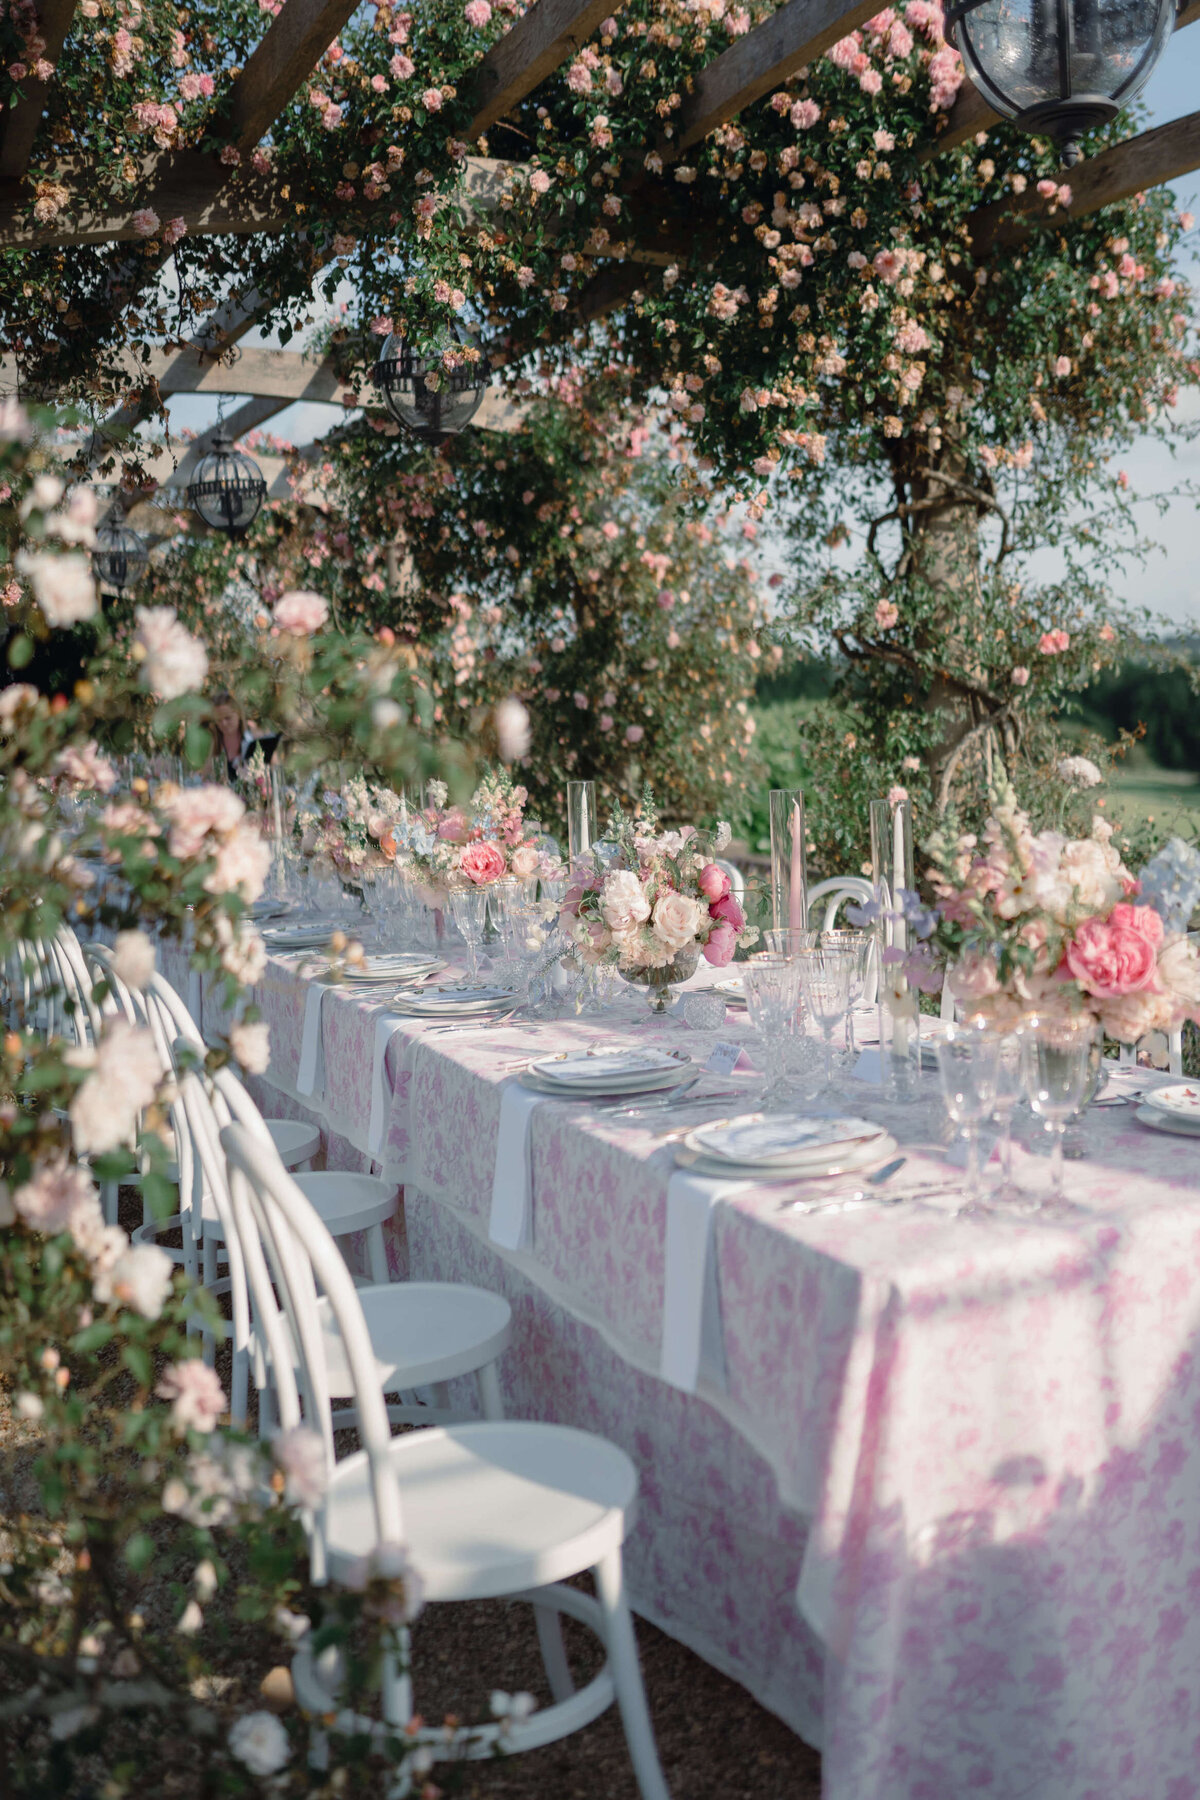 wedding dinner table with pink and white floral linen under a rose arbour full of pink roses in the gardens of the romantic wedding venue euridge manor